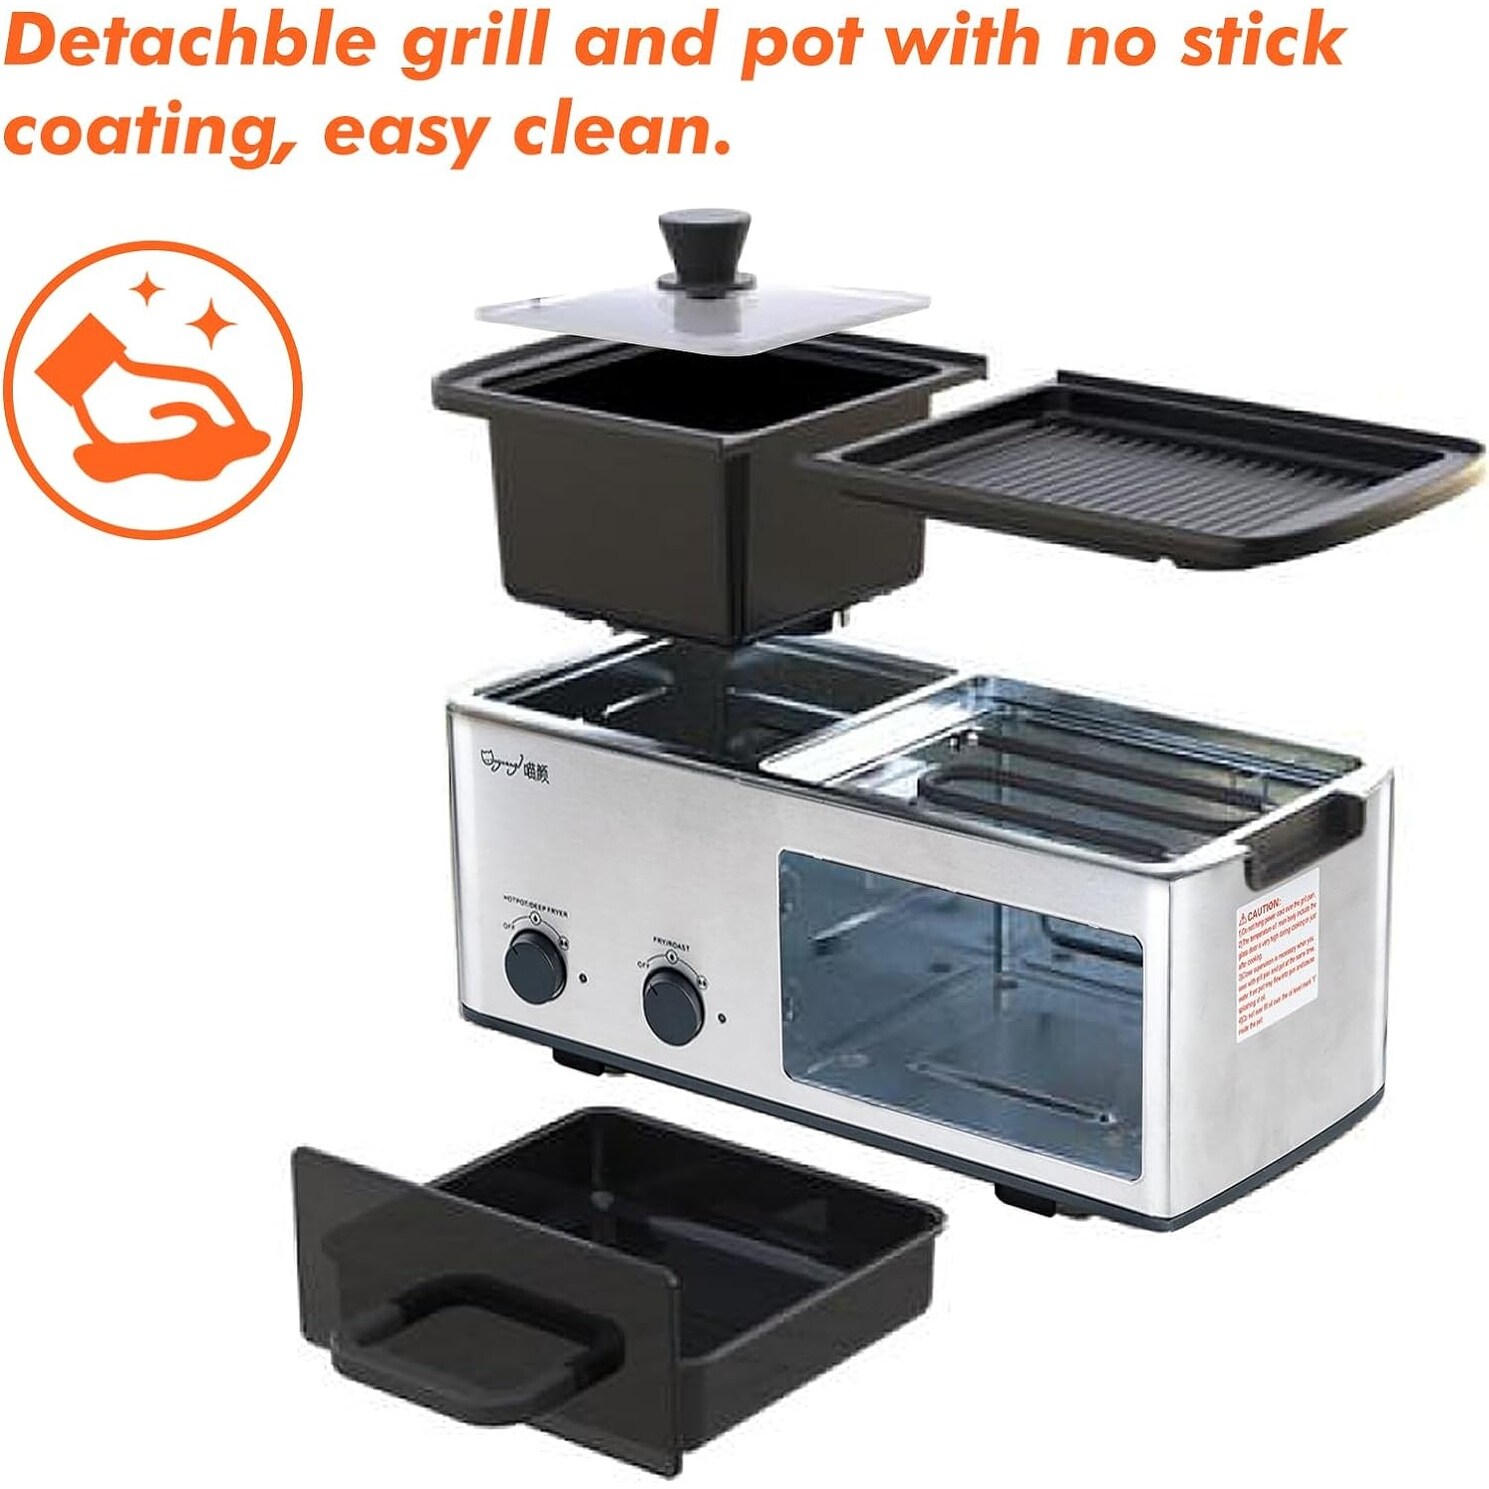 4 in 1 Breakfast Maker Station With Grill, Toast Drawer and Frying